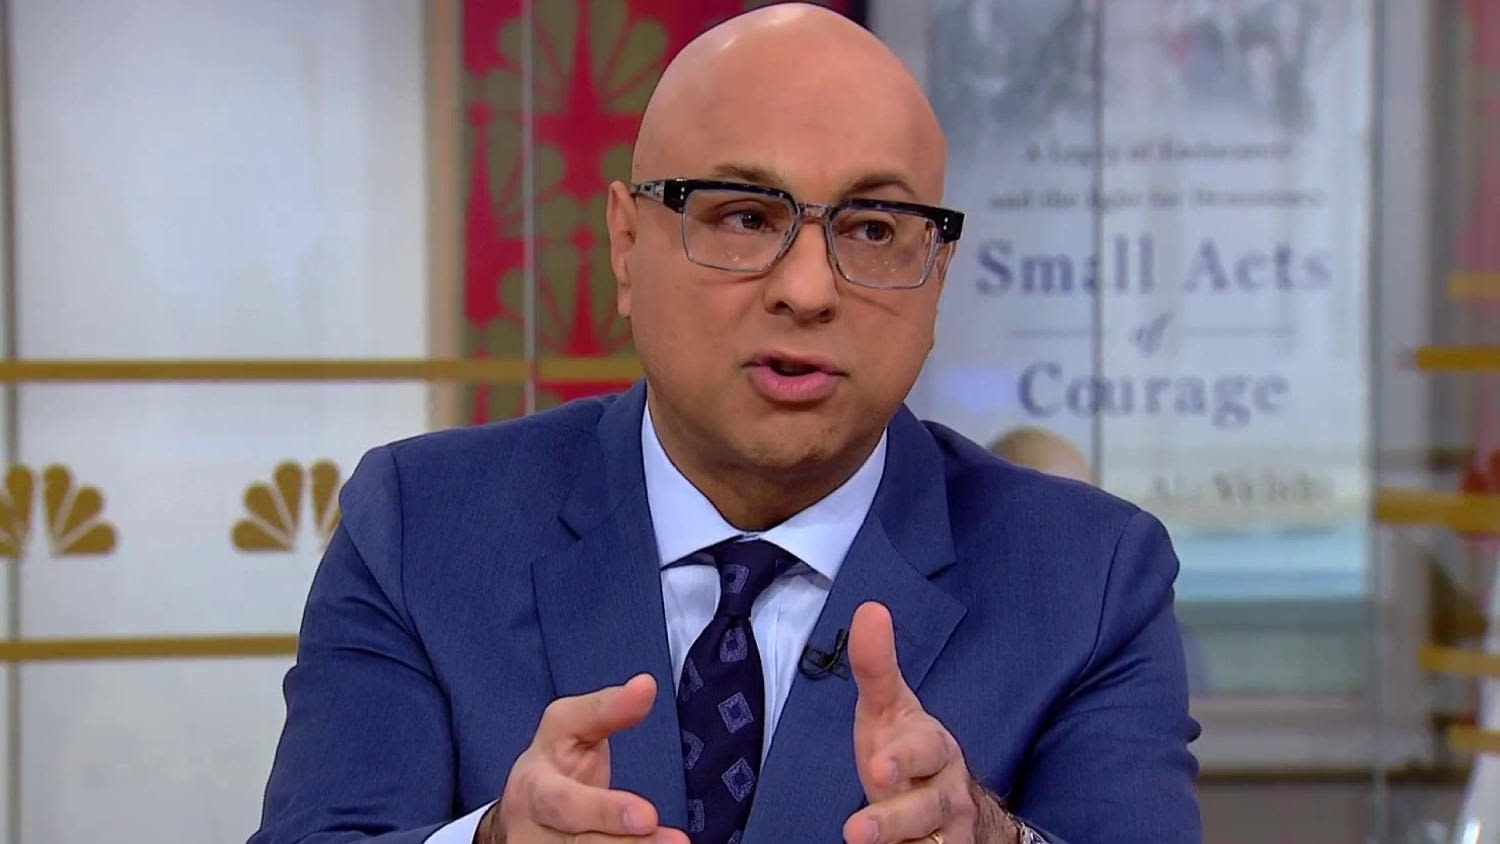 'We've got to encourage debate': Ali Velshi stresses the need for open dialogue